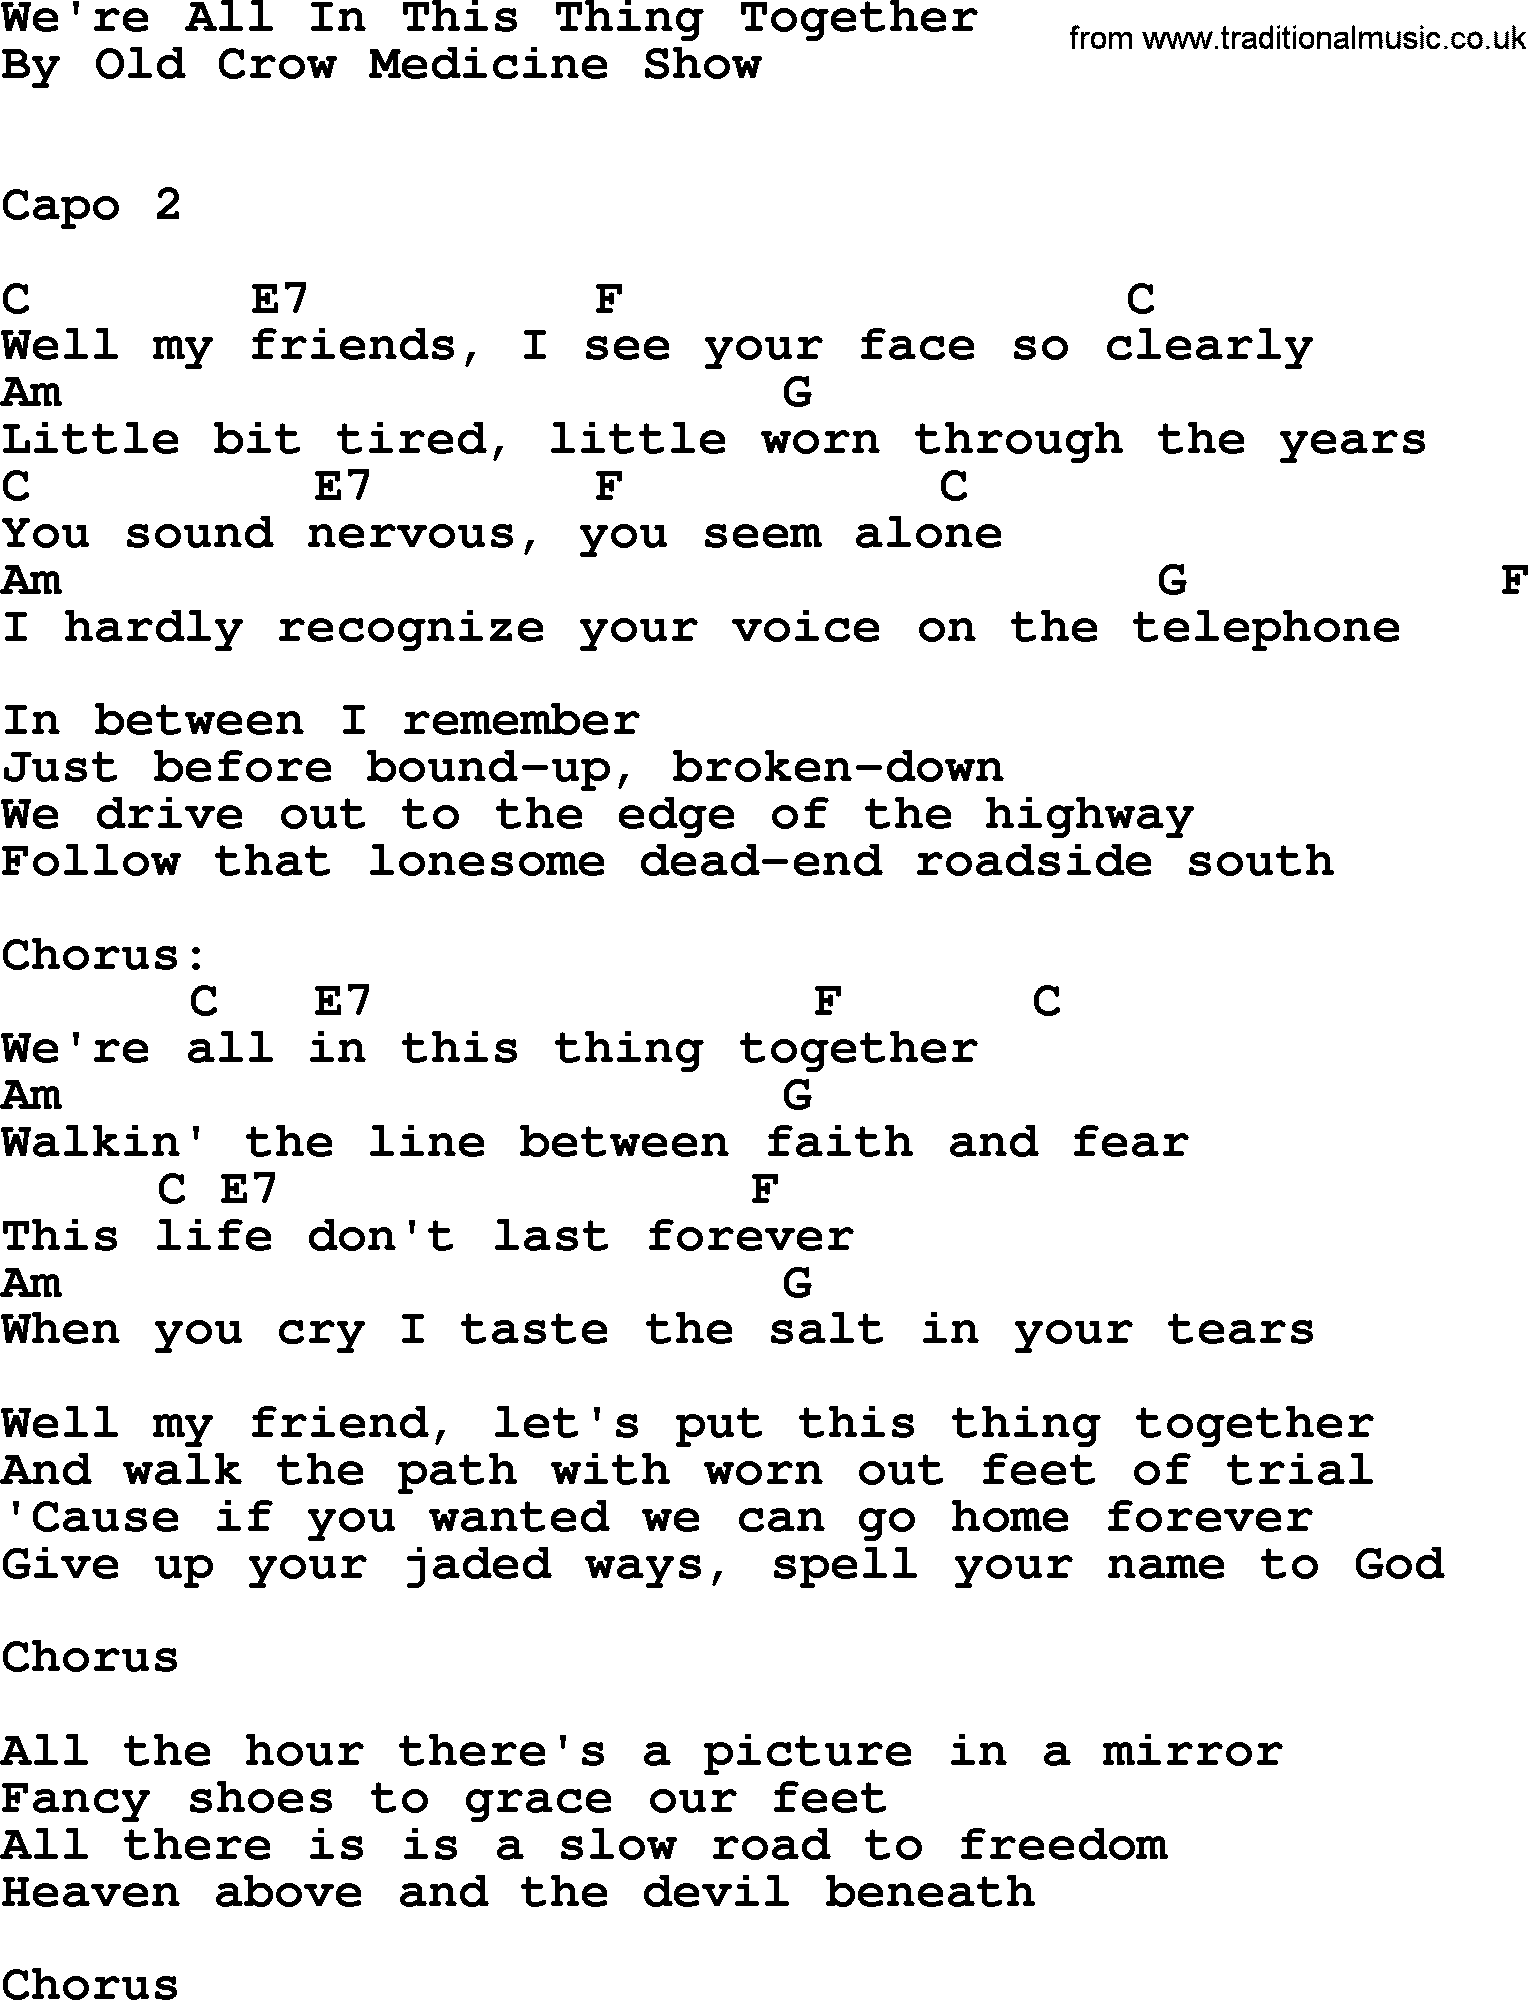 Bluegrass song: We're All In This Thing Together, lyrics and chords